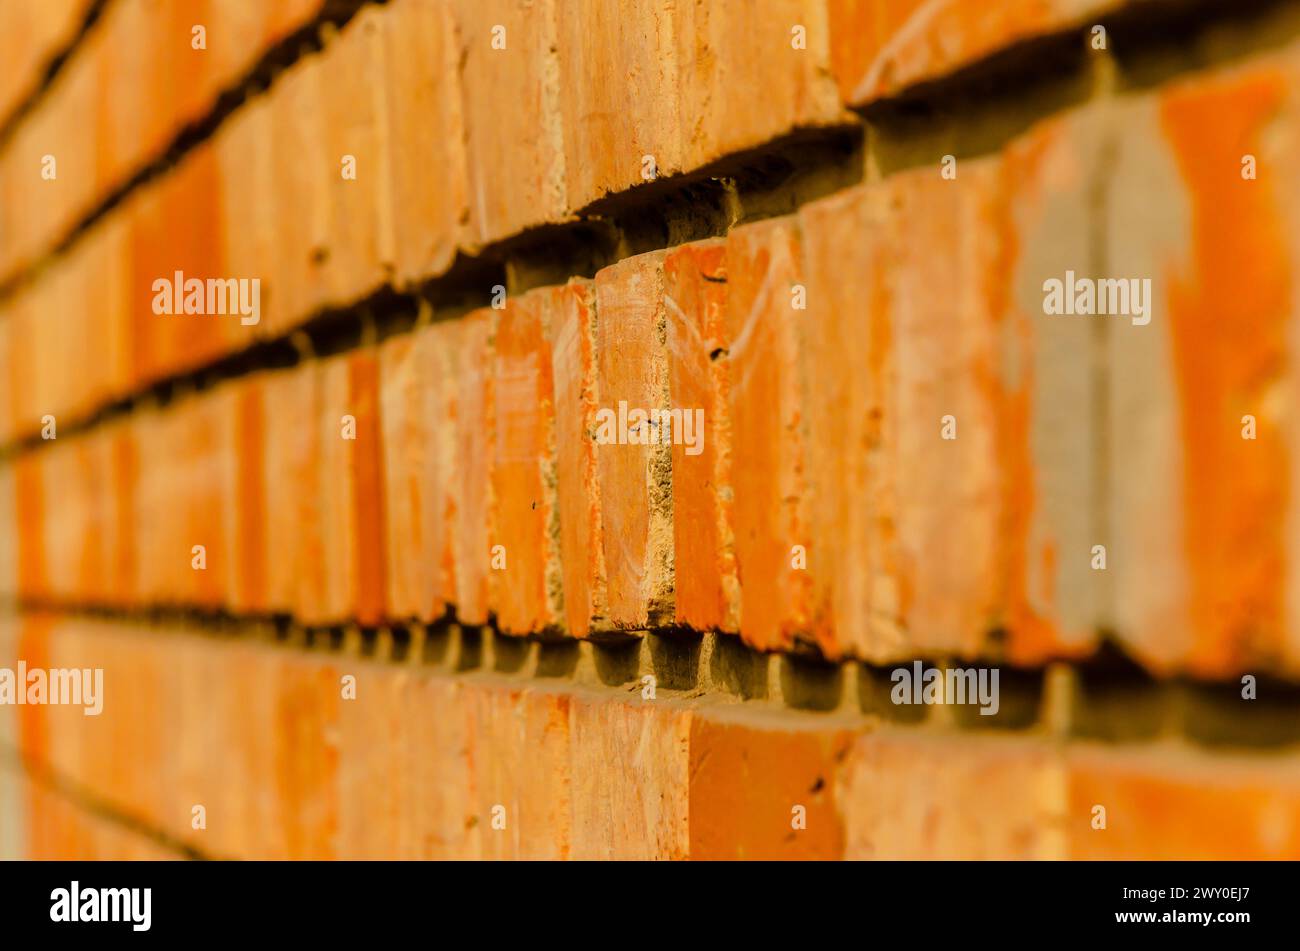 An abstract photograph of the layout of bricks making up the exterior wall of a house. Stock Photo